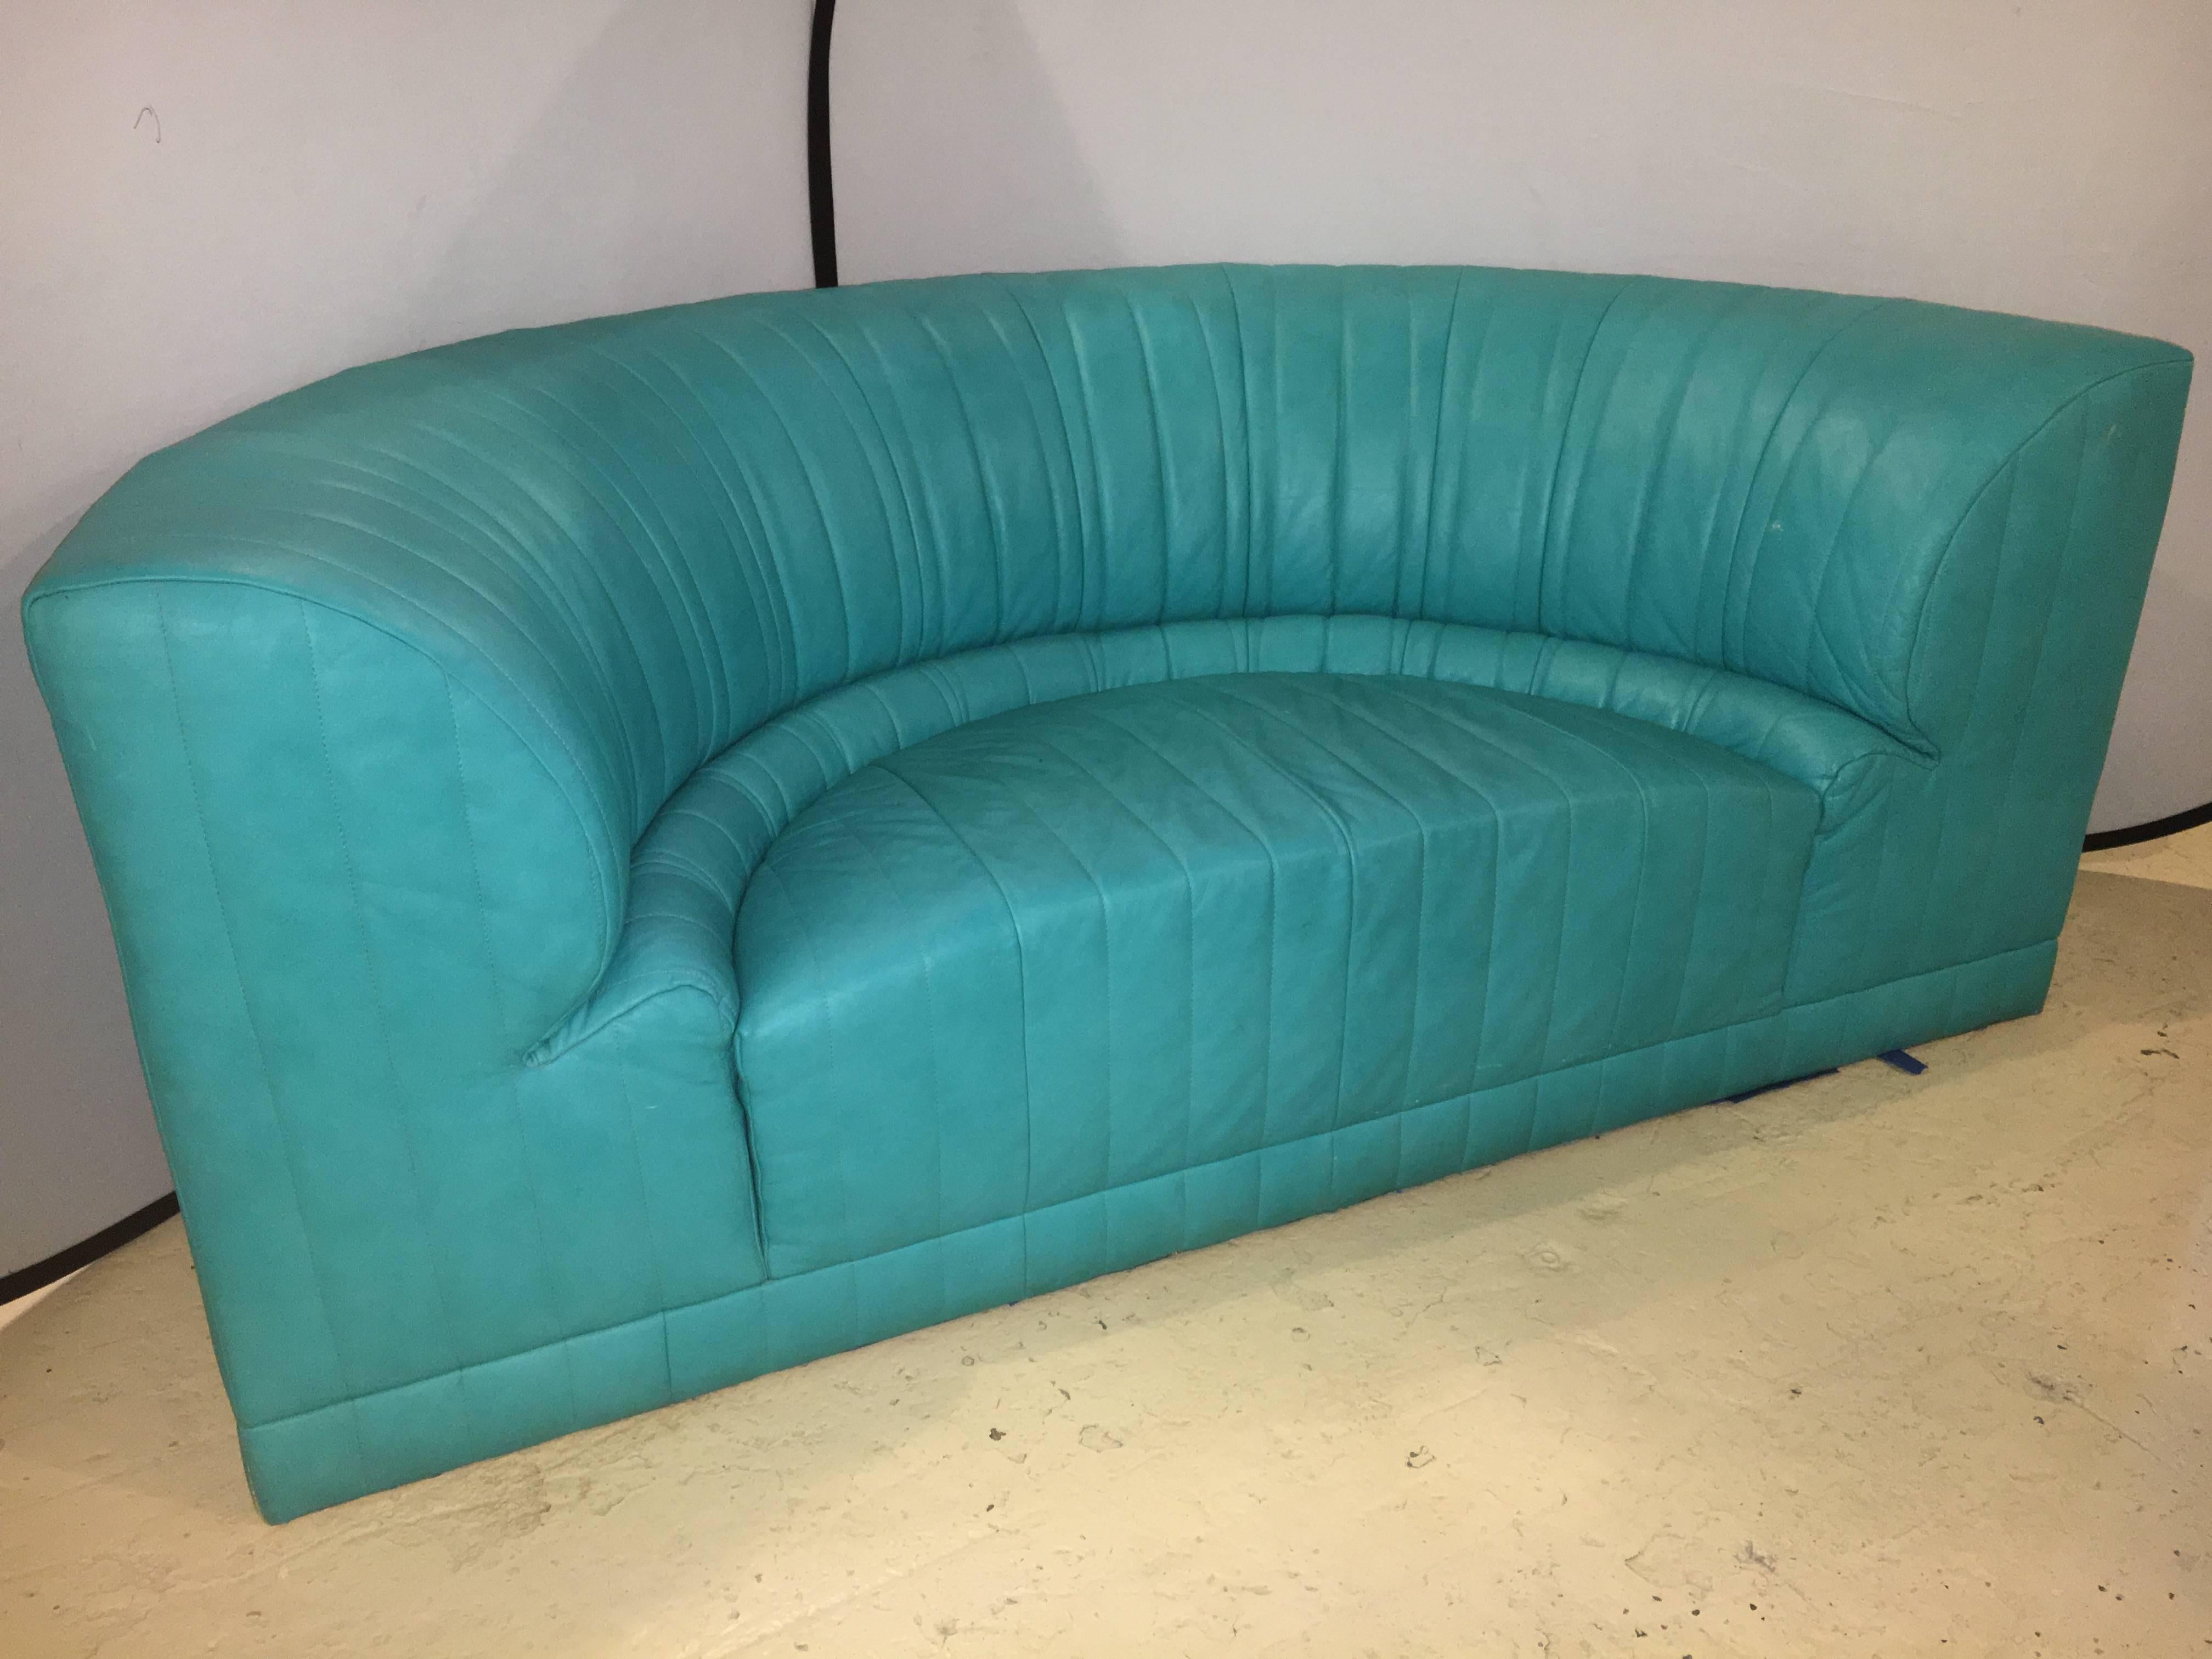 Roche Bobois semi-circular couch or settee. A wonderful sofa or loveseat by Bobois. The finest leather on a curved back loveseat that could not be more comfortable or stylish. Signed as is the matching tete-e-tete that comes with it but is sold